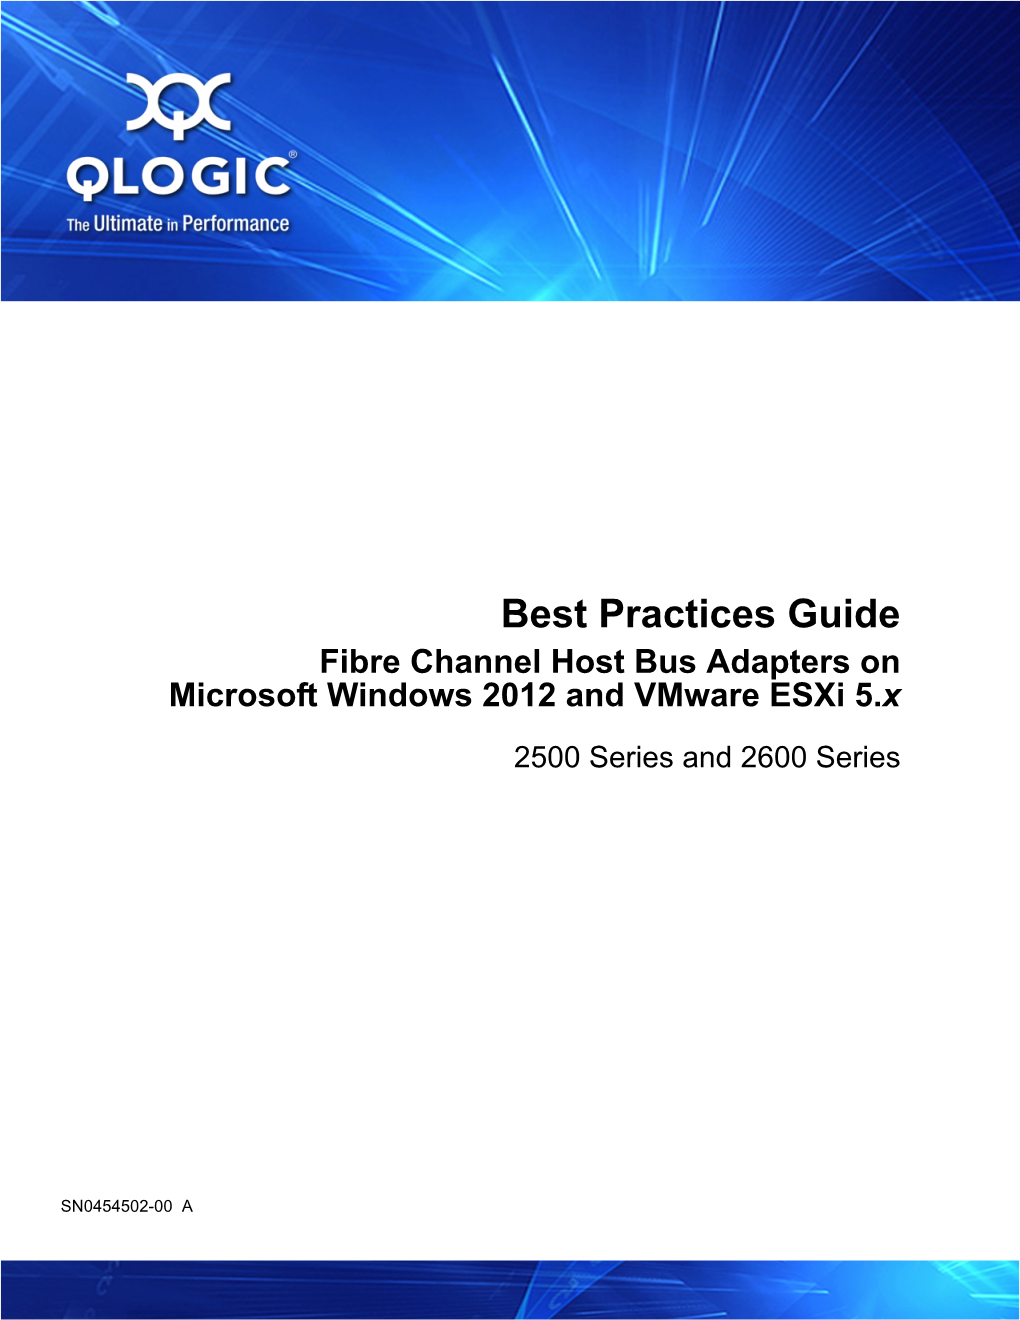 Best Practices Guide: Fibre Channel Host Bus Adapters on Microsoft